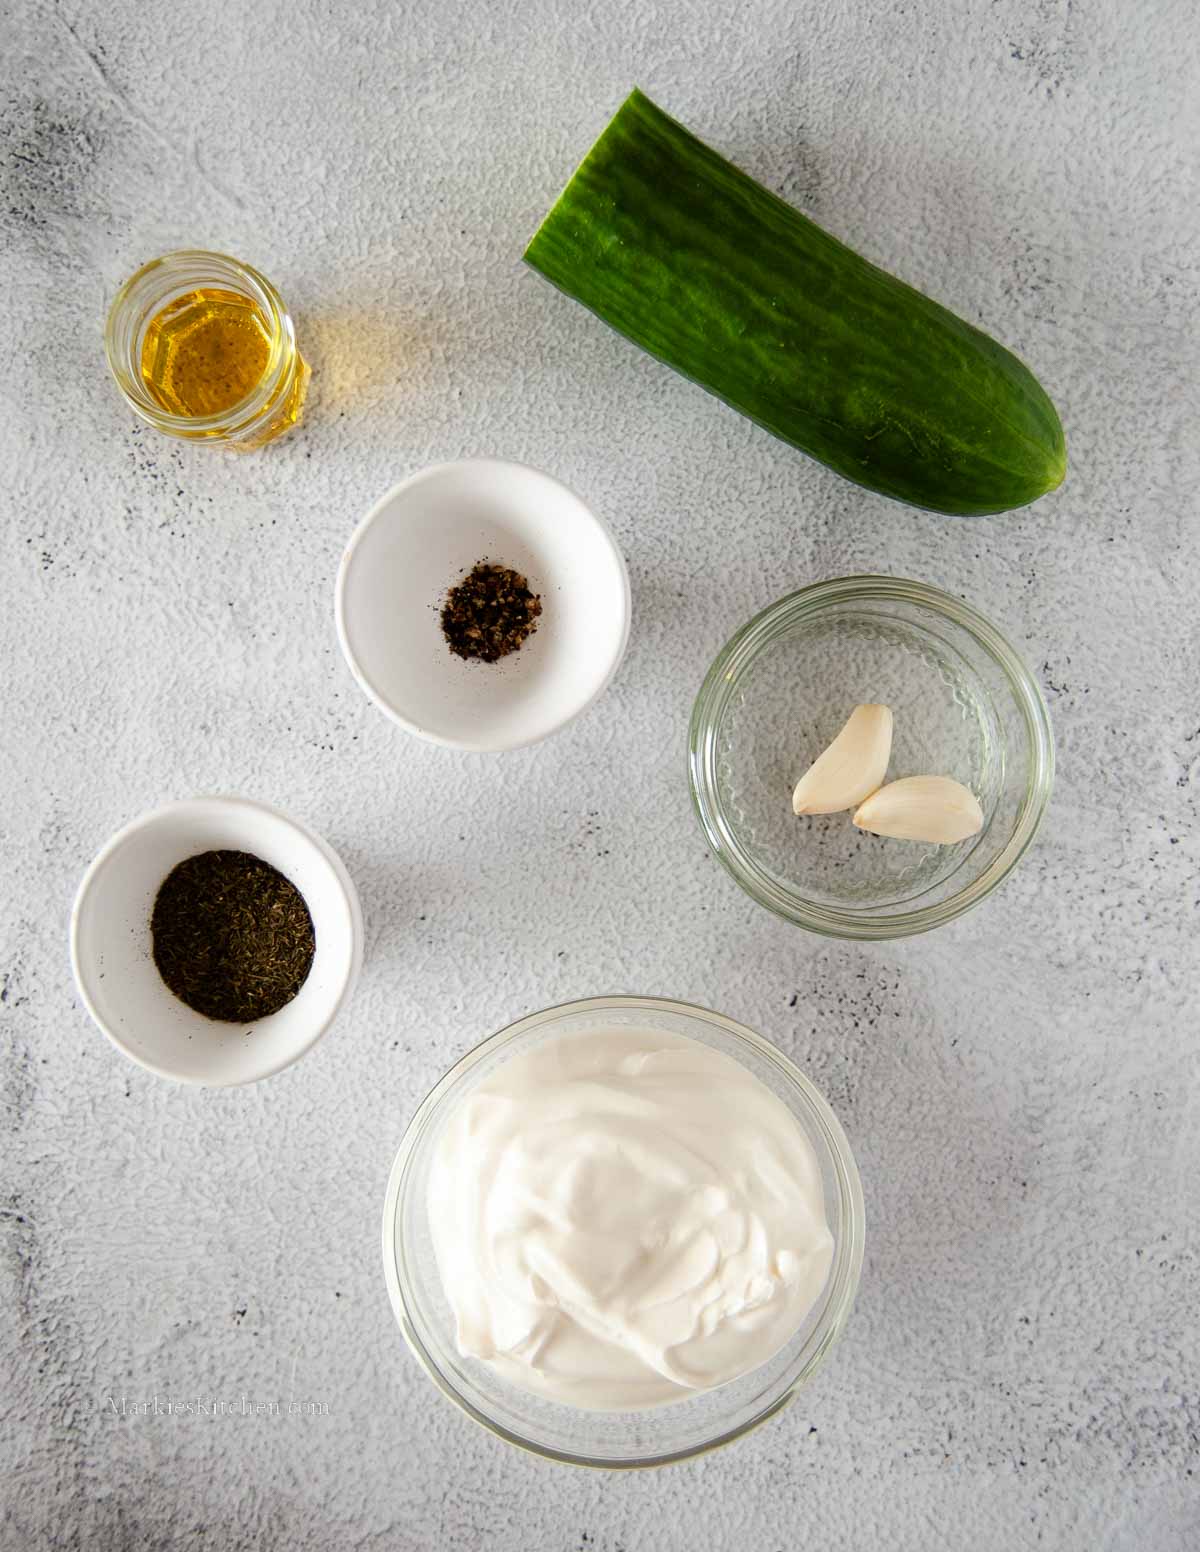 A top down photo of cooking ingredients: half a cucumber, a small amount of oil, two pinch bowls with seasonings, a bowl of sour cream, and a bowl with two cloves of garlic.